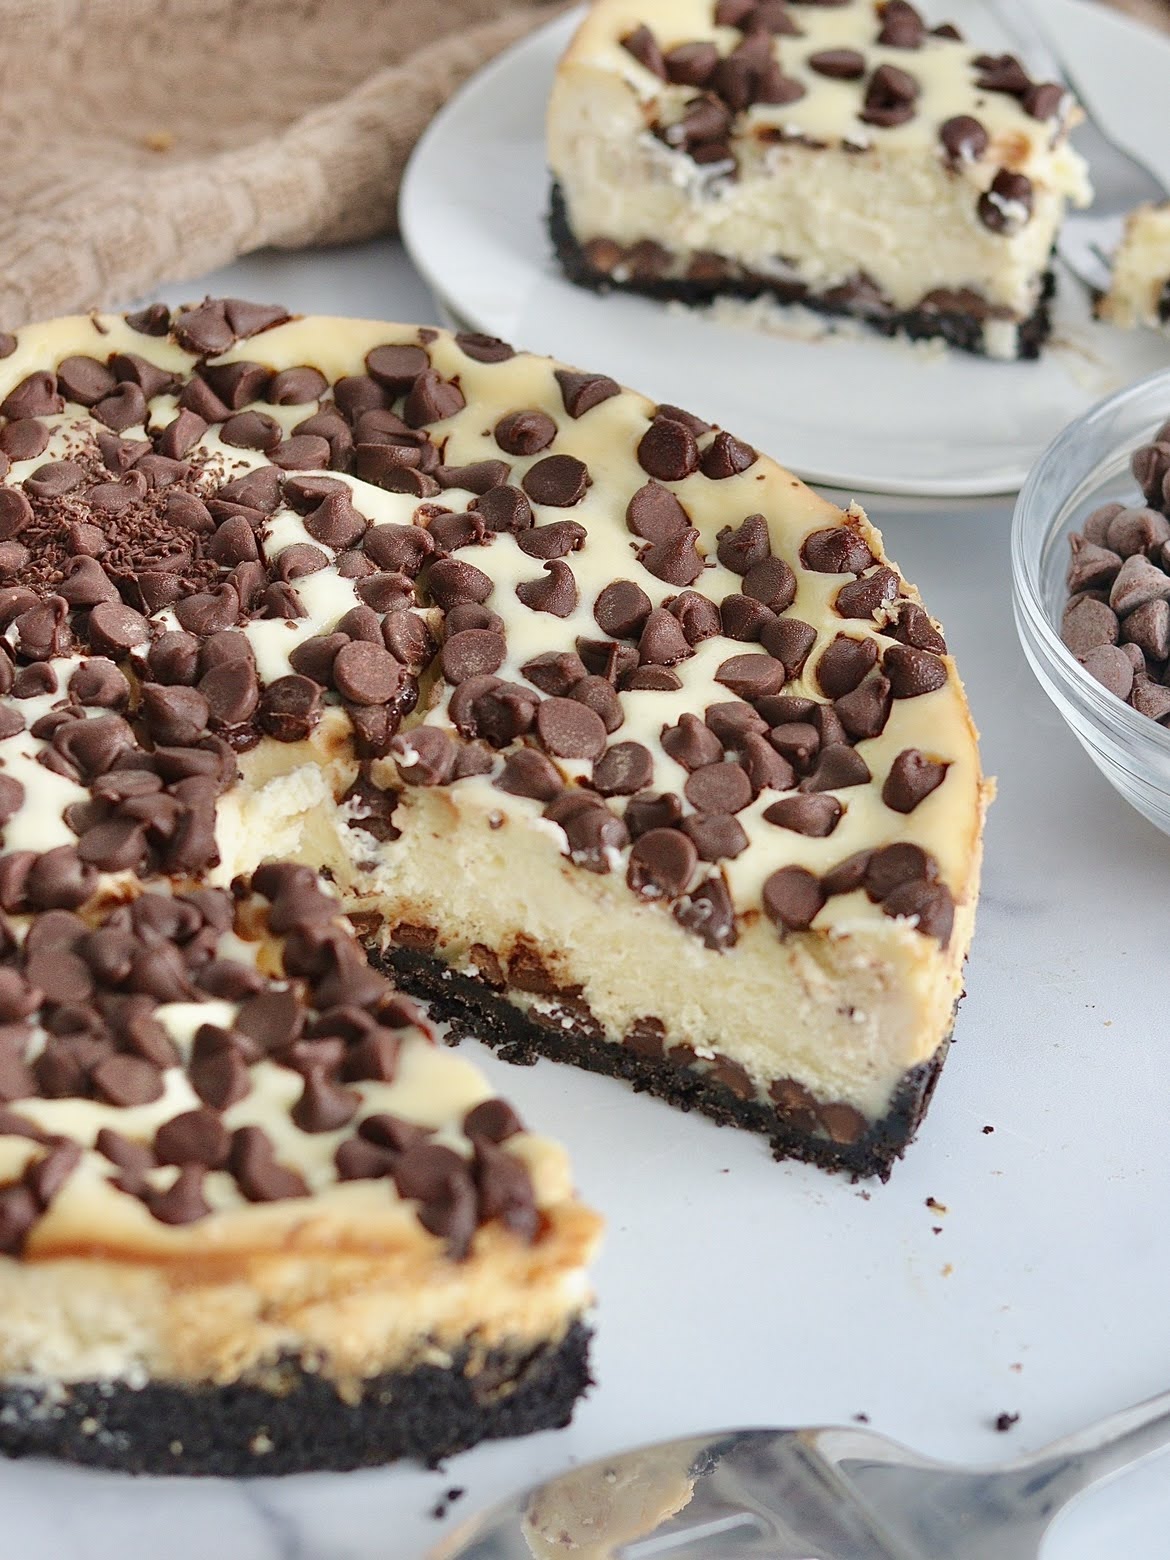 Overhead photo of a sliced chocolate chip cheesecake.